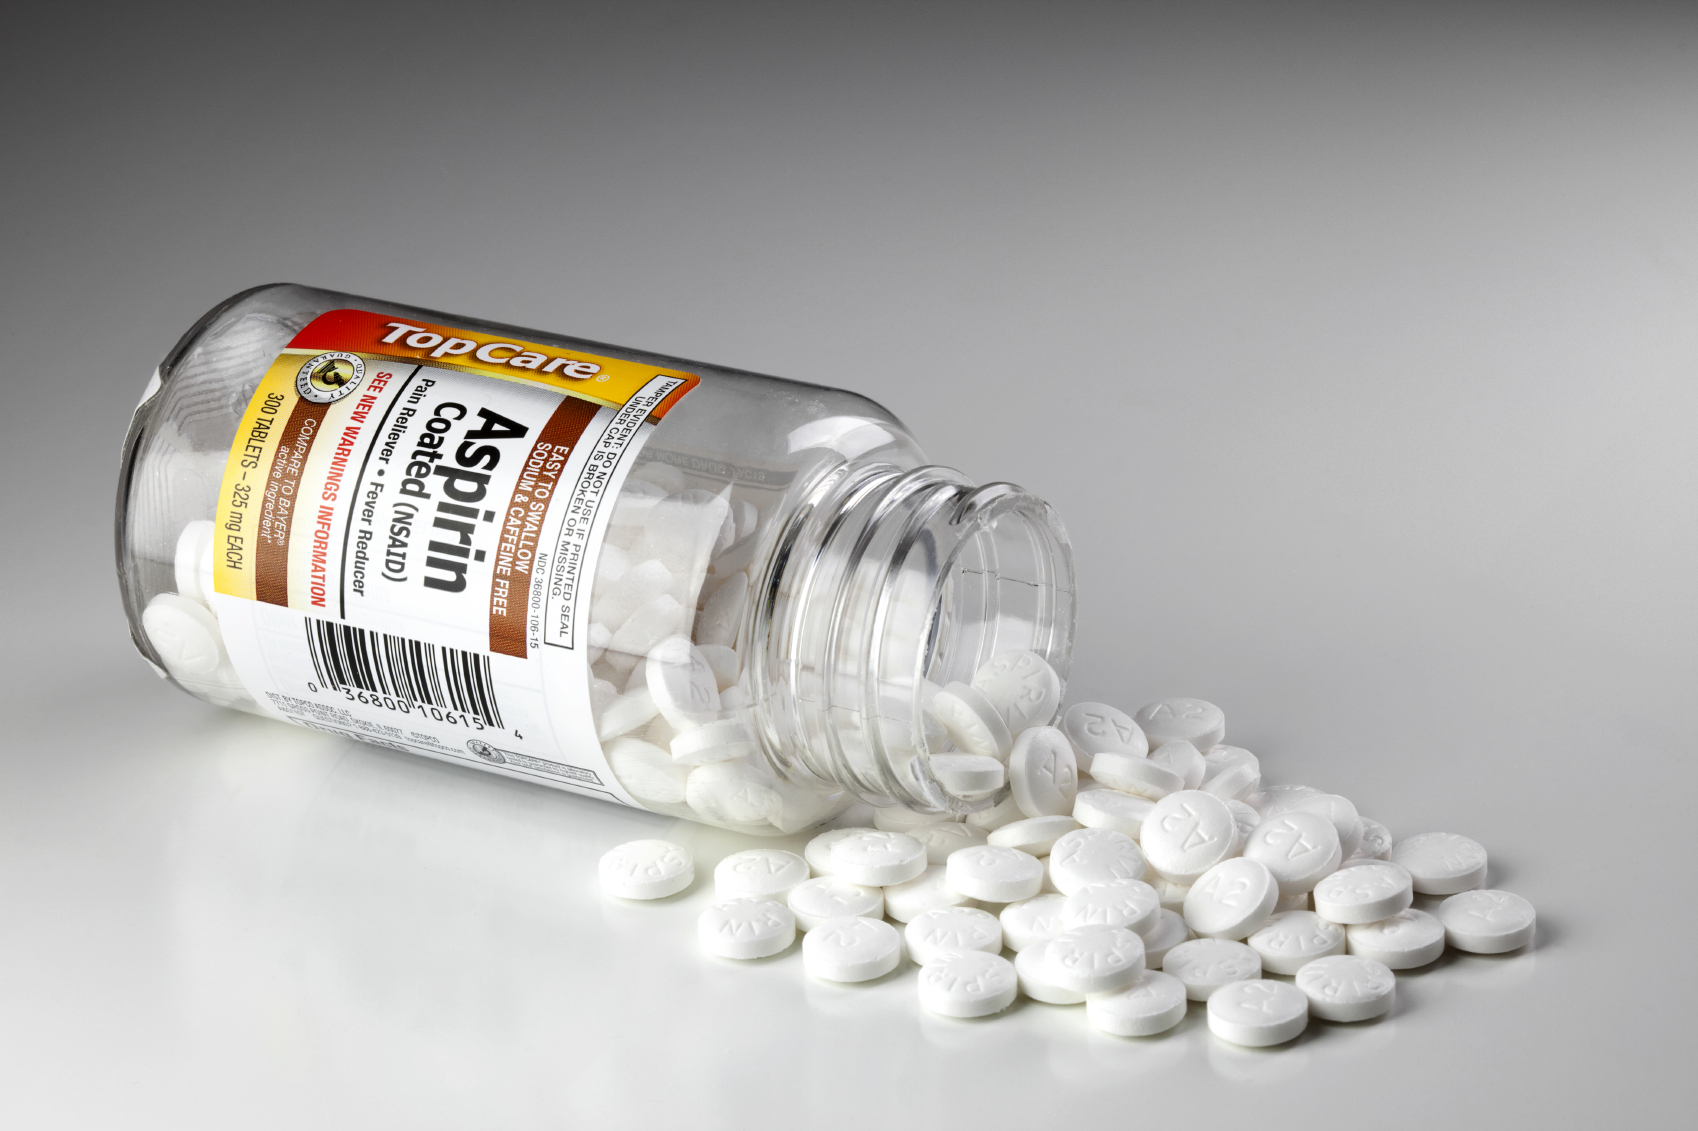 About 40 million Americans take aspirin every day. They think it’ll help keep their heart healthy. But that may actually help kill it even faster instead.